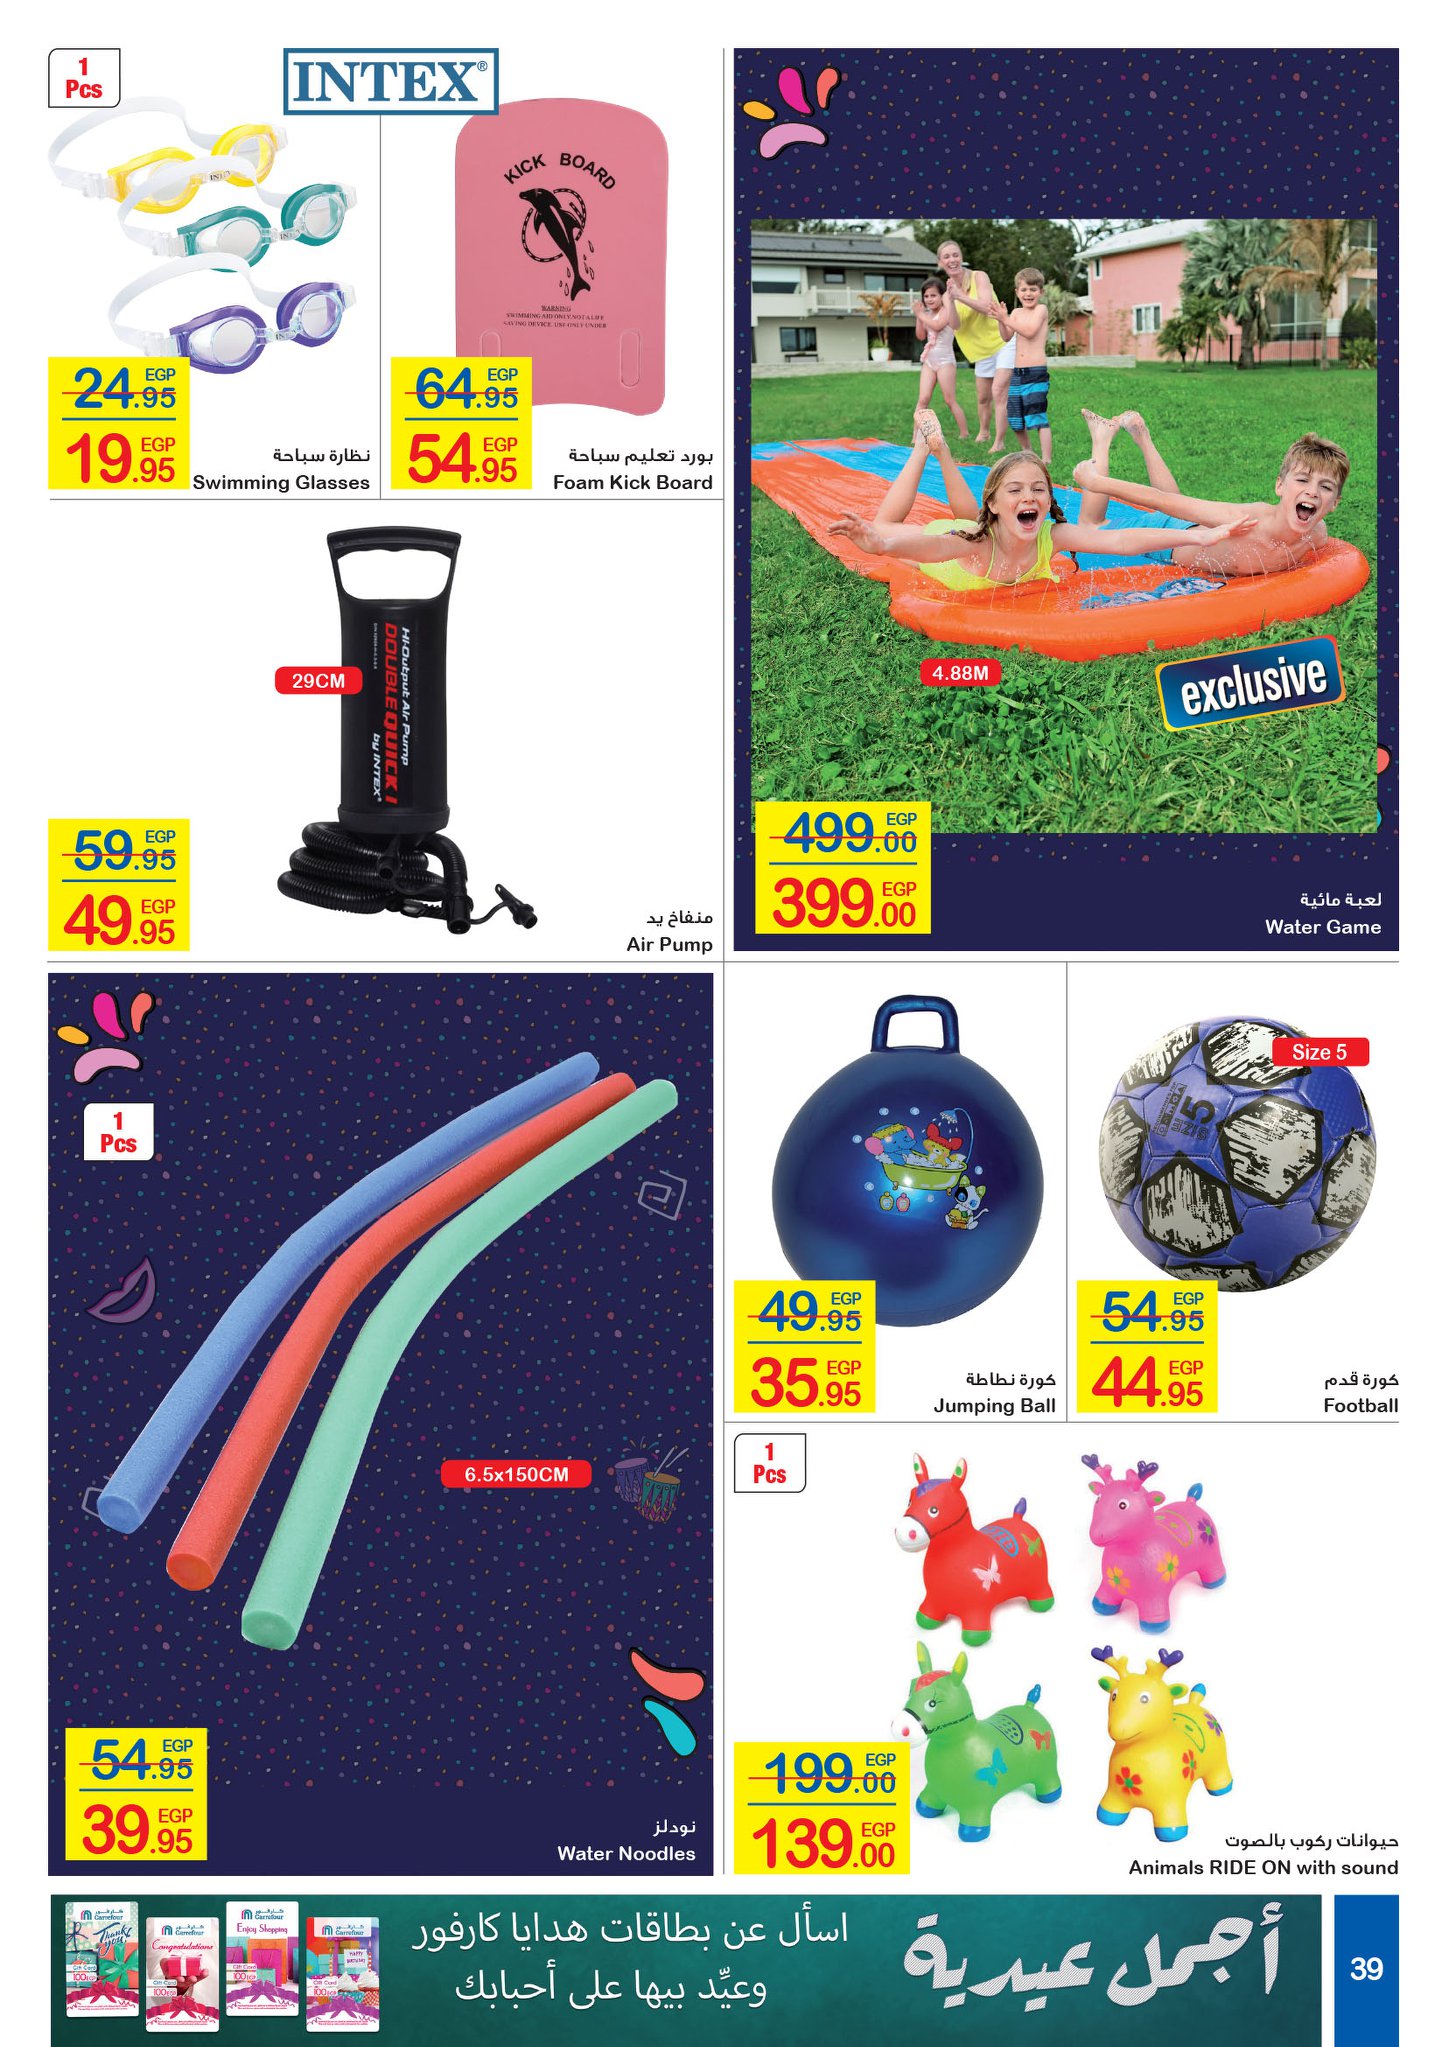 Carrefour Flyer from 16/7 till 27/7 | Carrefour Egypt 38